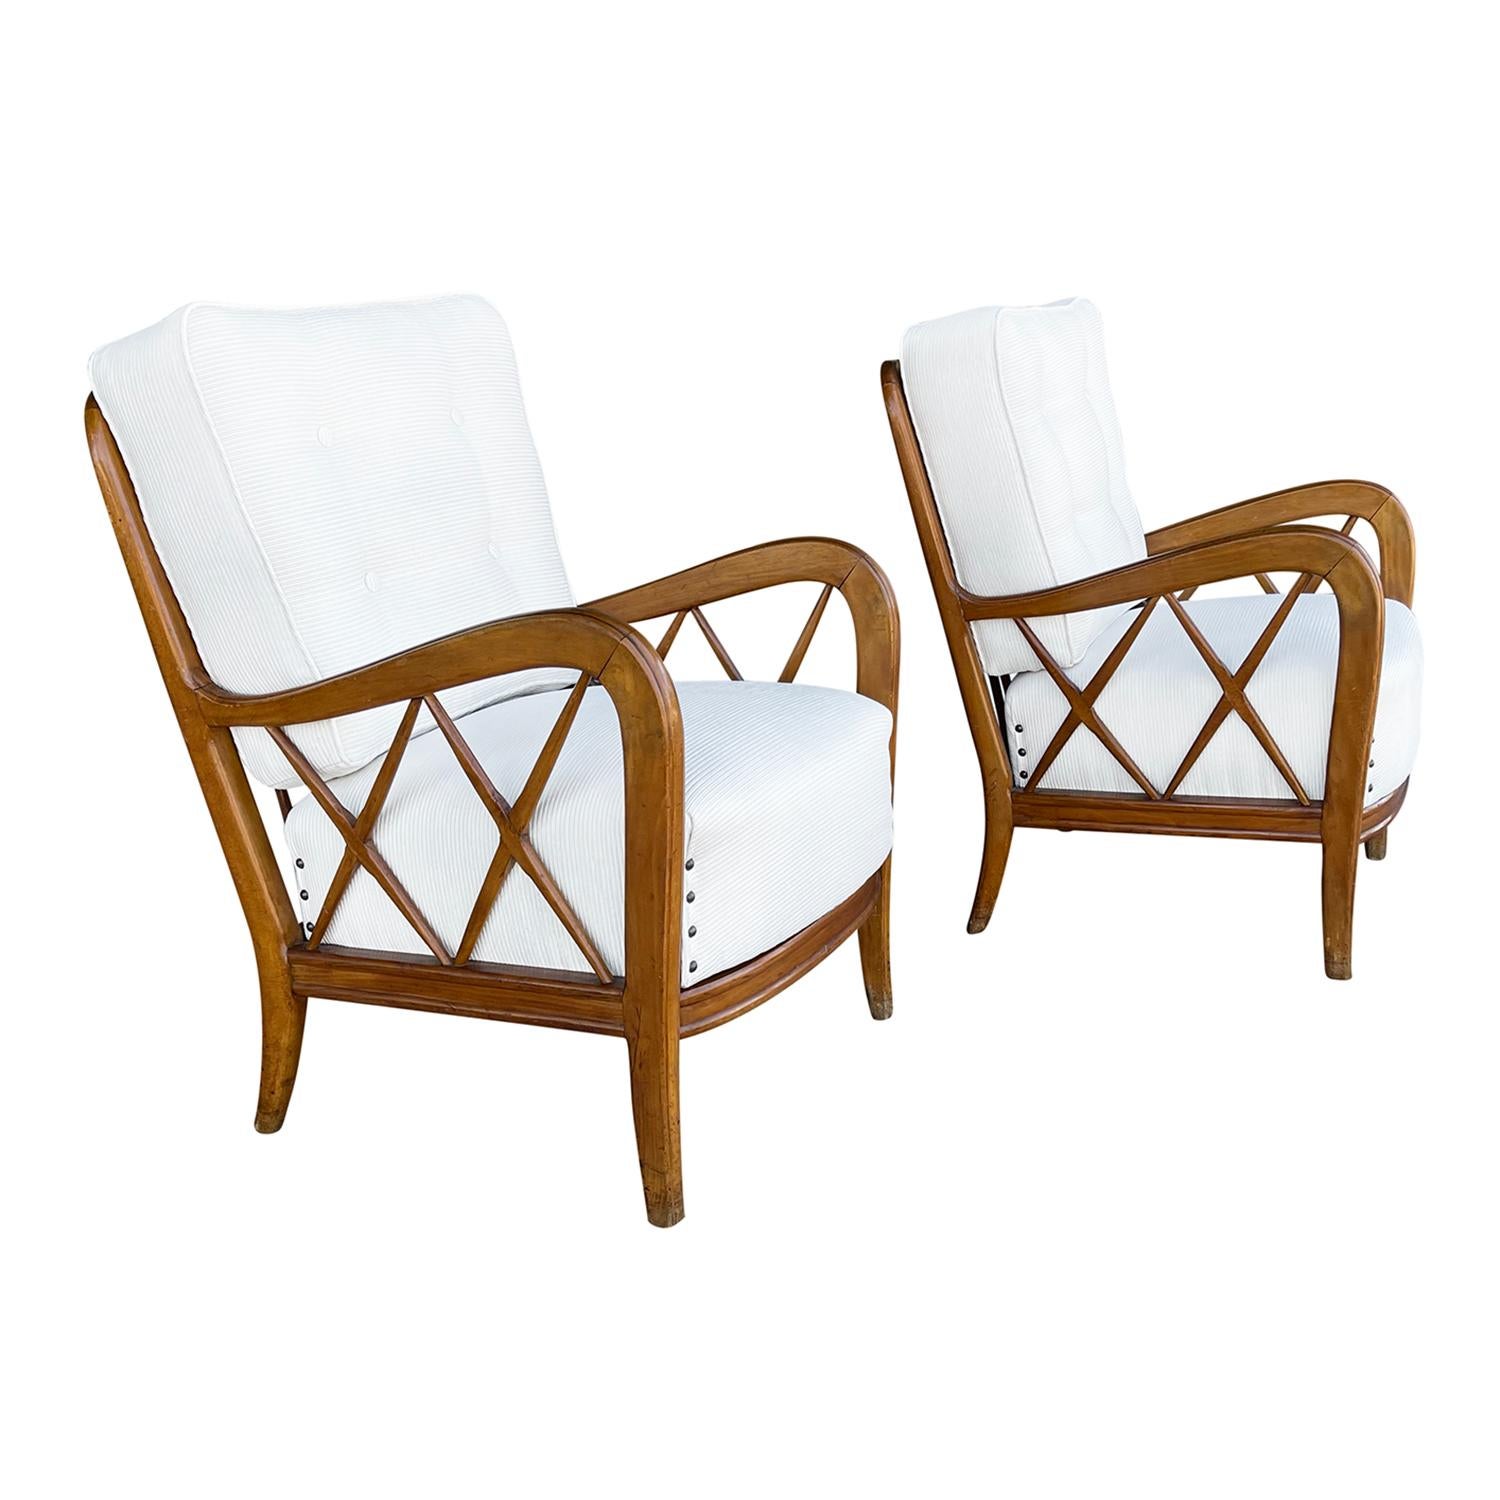 A vintage Mid-Century Modern Italian pair of armchairs made of hand carved Walnut. The backrest of the lounge chairs are spindled with X-form slats arms with a button-tufted back cushion and metal nailheads, standing on four wooden tapered legs.